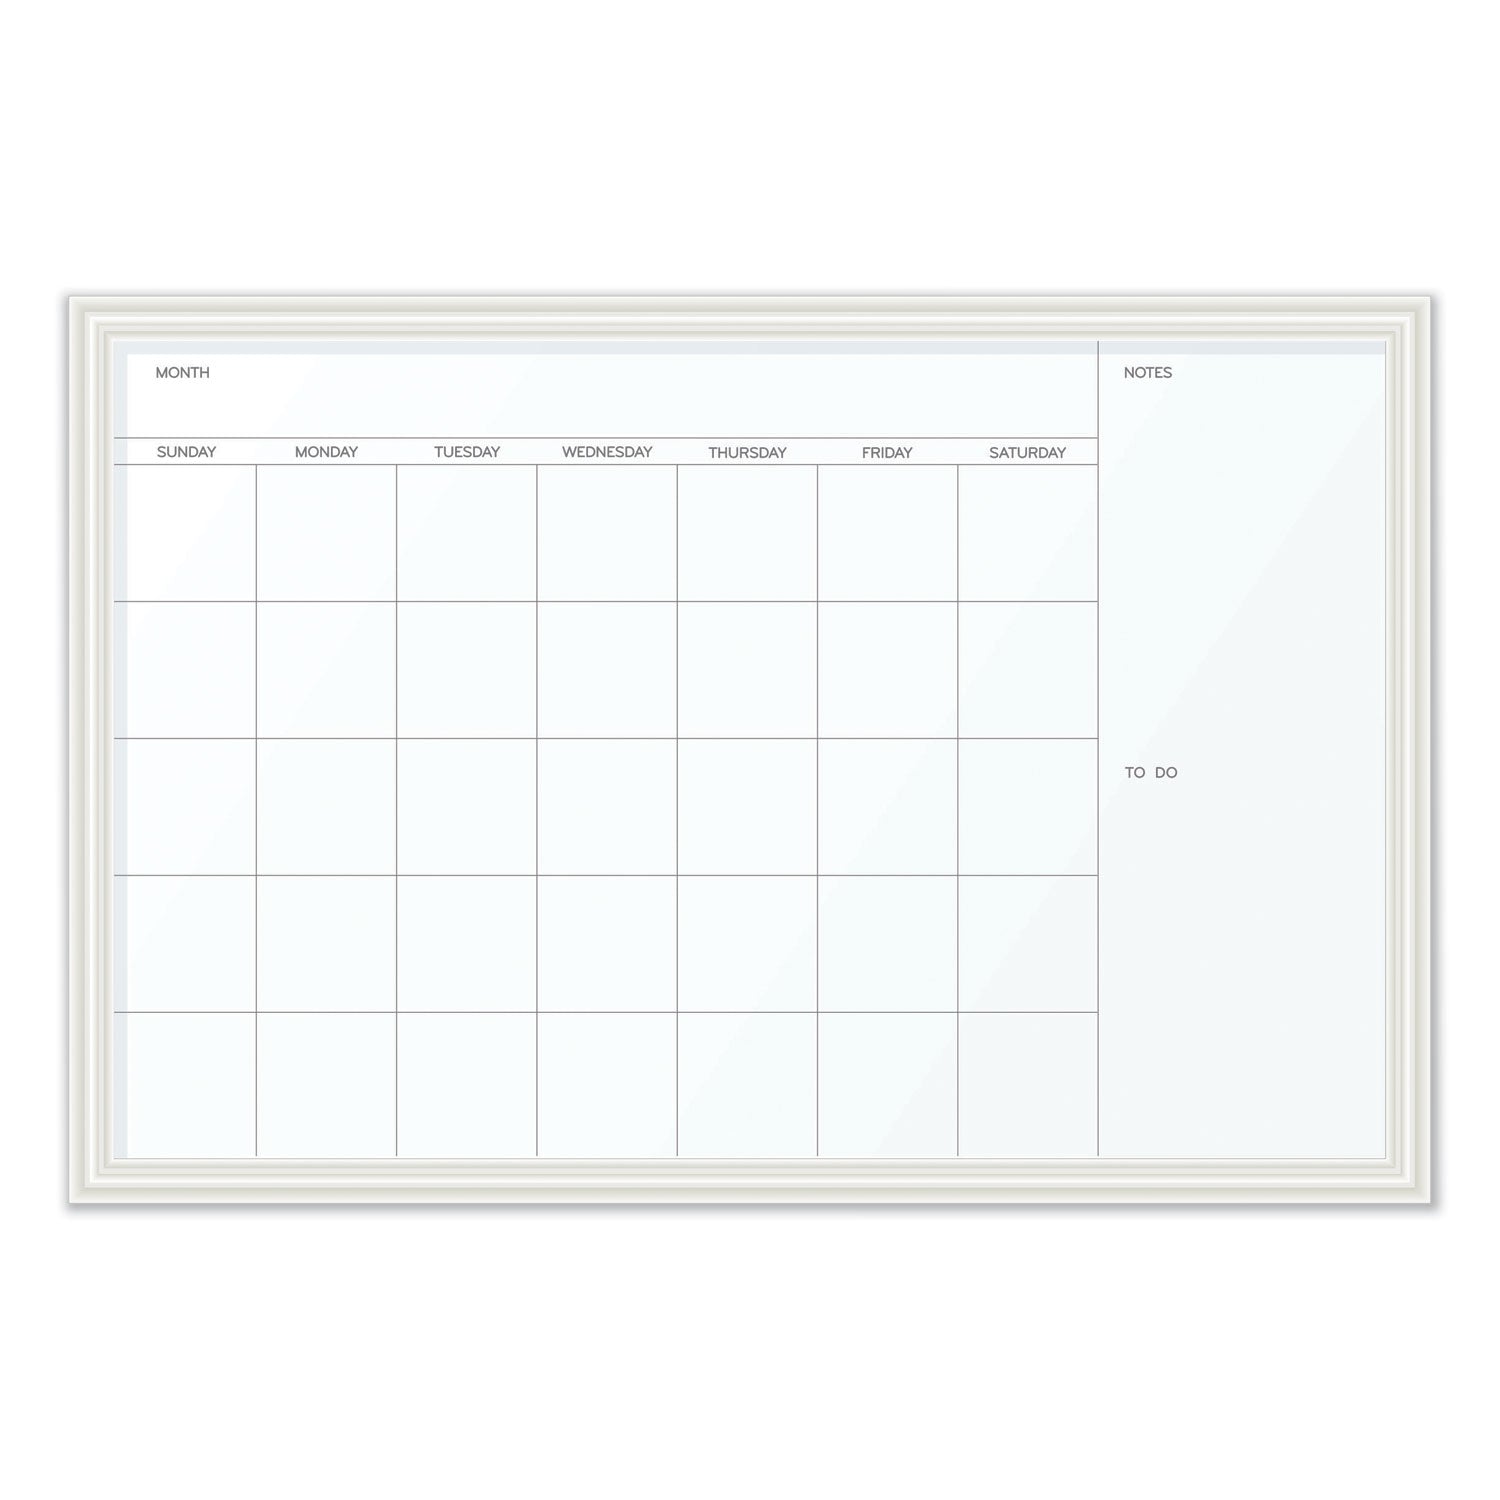 magnetic-dry-erase-calendar-with-decor-frame-one-month-30-x-20-white-surface-white-wood-frame_ubr2075u0001 - 1